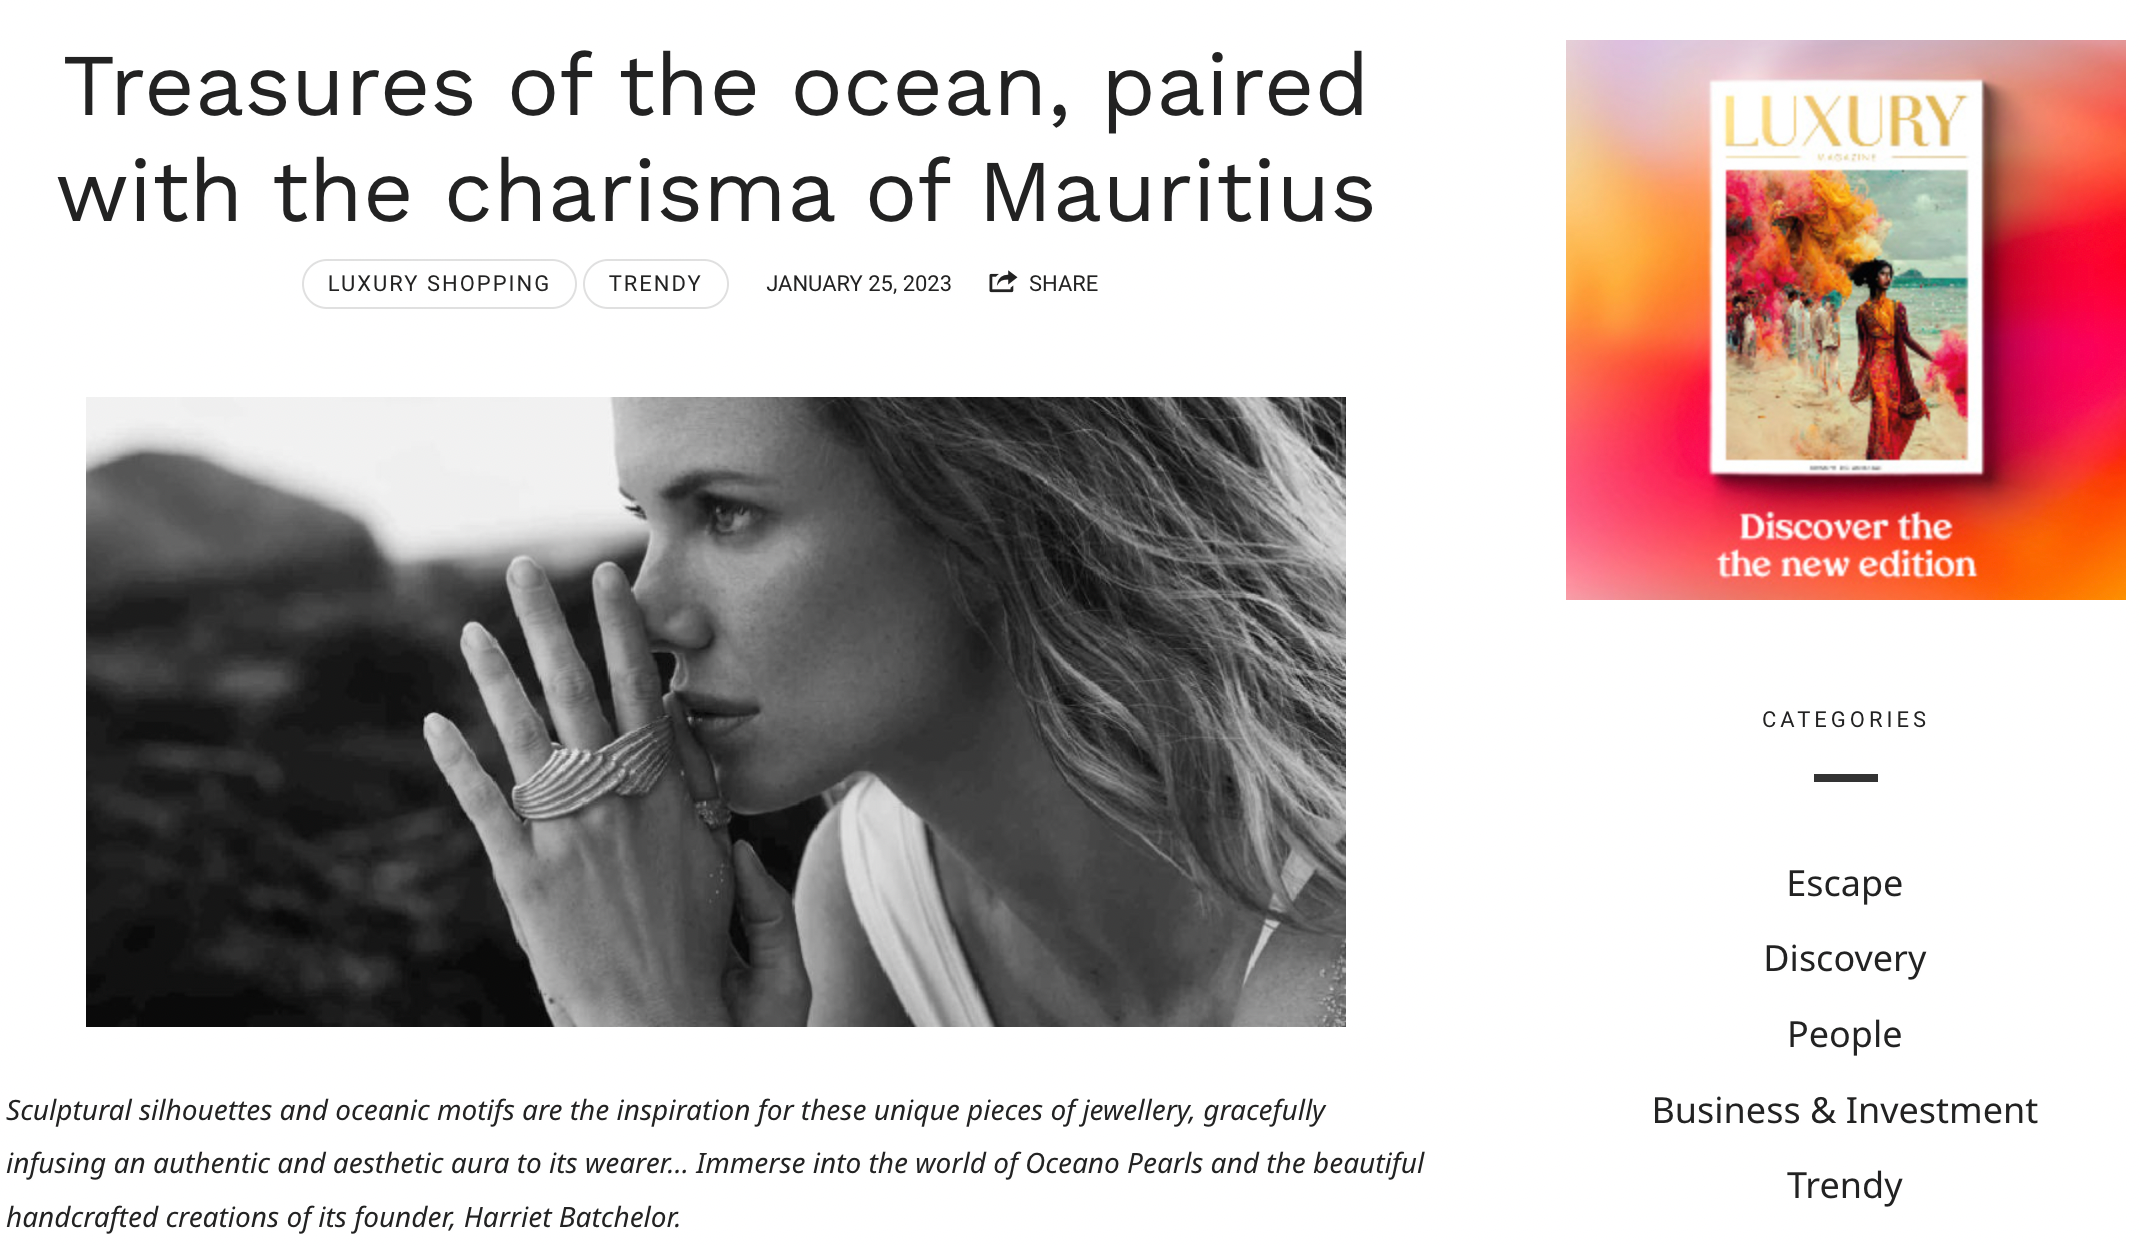 Luxury Magazine - Treasures of the ocean, paired with the charisma of Mauritius - Oceano Pearls